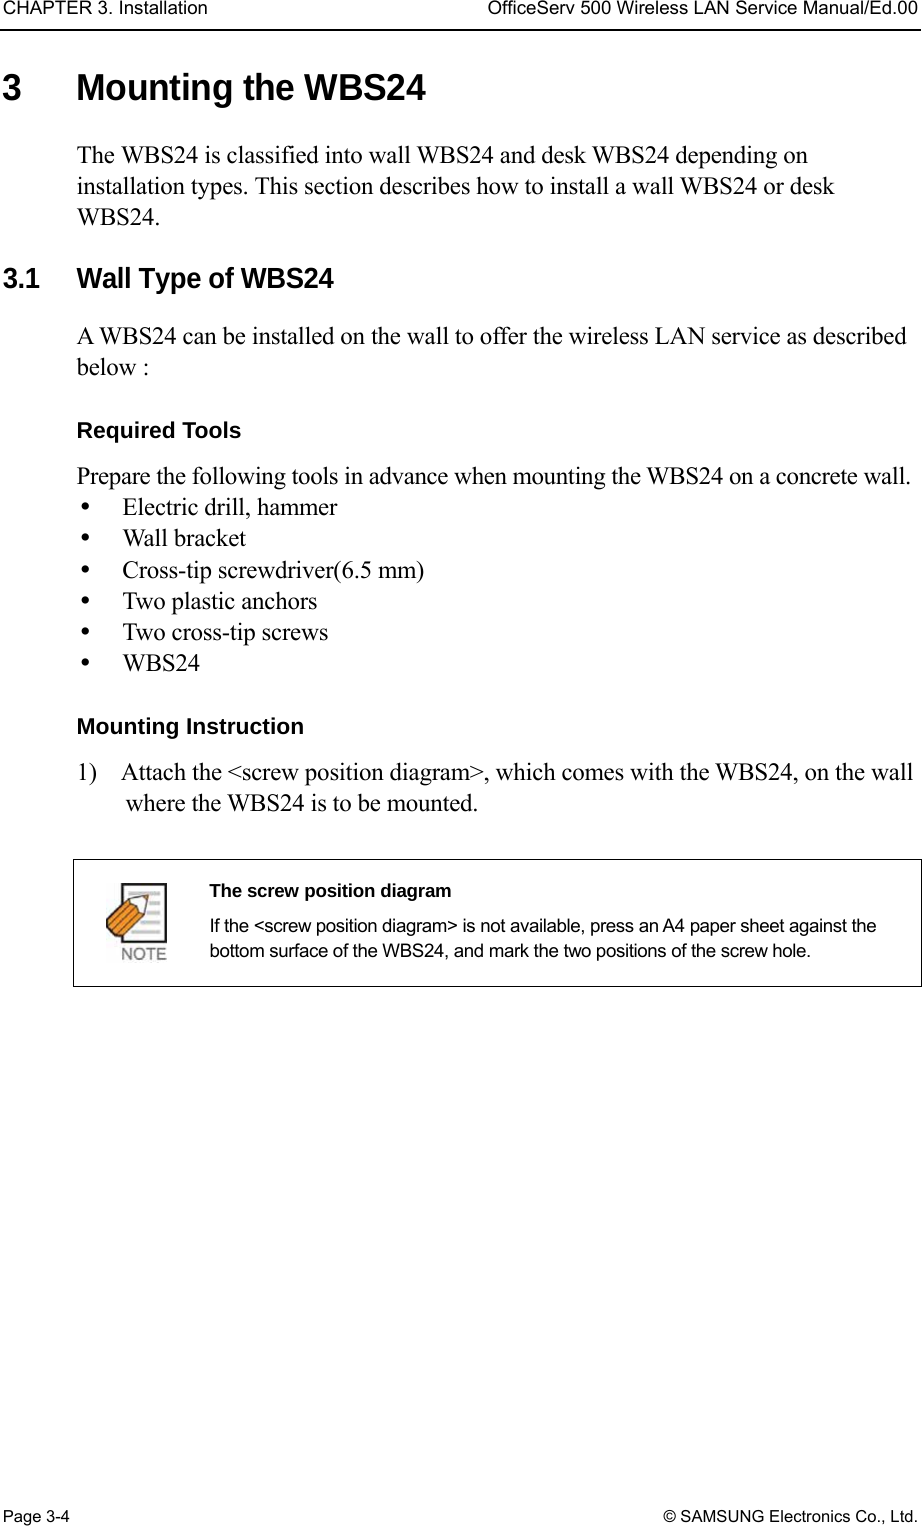 CHAPTER 3. Installation  OfficeServ 500 Wireless LAN Service Manual/Ed.00 Page 3-4 © SAMSUNG Electronics Co., Ltd. 3  Mounting the WBS24   The WBS24 is classified into wall WBS24 and desk WBS24 depending on installation types. This section describes how to install a wall WBS24 or desk WBS24.  3.1  Wall Type of WBS24 A WBS24 can be installed on the wall to offer the wireless LAN service as described below :    Required Tools   Prepare the following tools in advance when mounting the WBS24 on a concrete wall.     Electric drill, hammer   Wall bracket   Cross-tip screwdriver(6.5 mm)   Two plastic anchors     Two cross-tip screws   WBS24  Mounting Instruction 1)    Attach the &lt;screw position diagram&gt;, which comes with the WBS24, on the wall where the WBS24 is to be mounted.   The screw position diagram   If the &lt;screw position diagram&gt; is not available, press an A4 paper sheet against the bottom surface of the WBS24, and mark the two positions of the screw hole.  